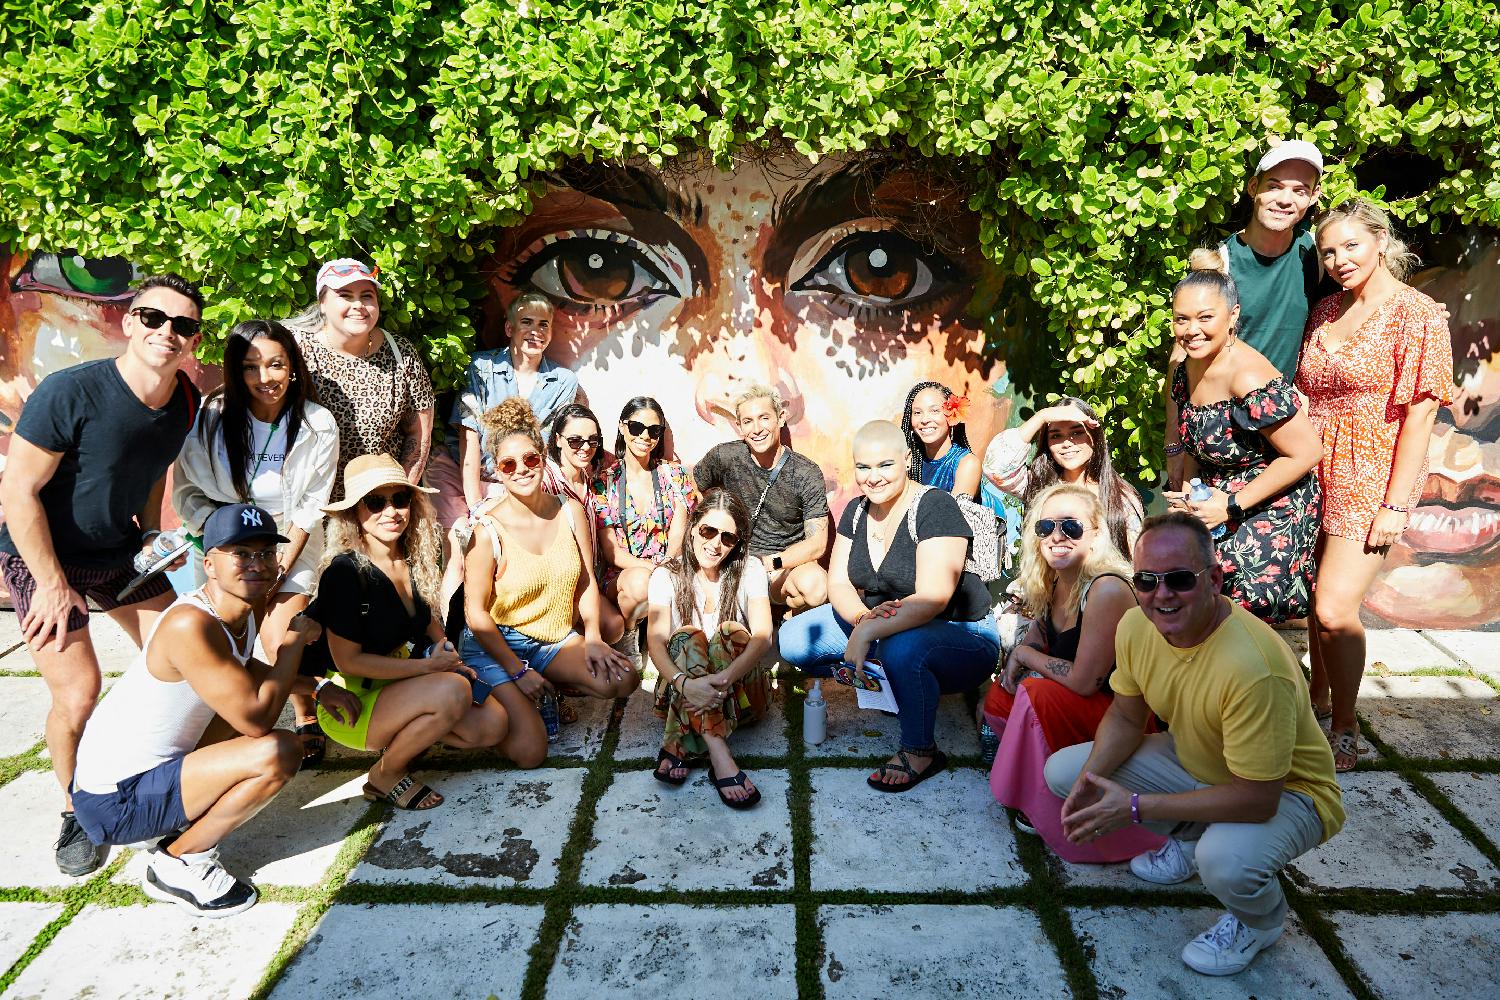 e.l.f.’s annual Beautyscape event was born out of e.l.f.’s brand values to empower and pay it forward. In 2019, Beautyscape brought together 25 beauty influencers together to experience and connect with the e.l.f. brand in the Bahamas.